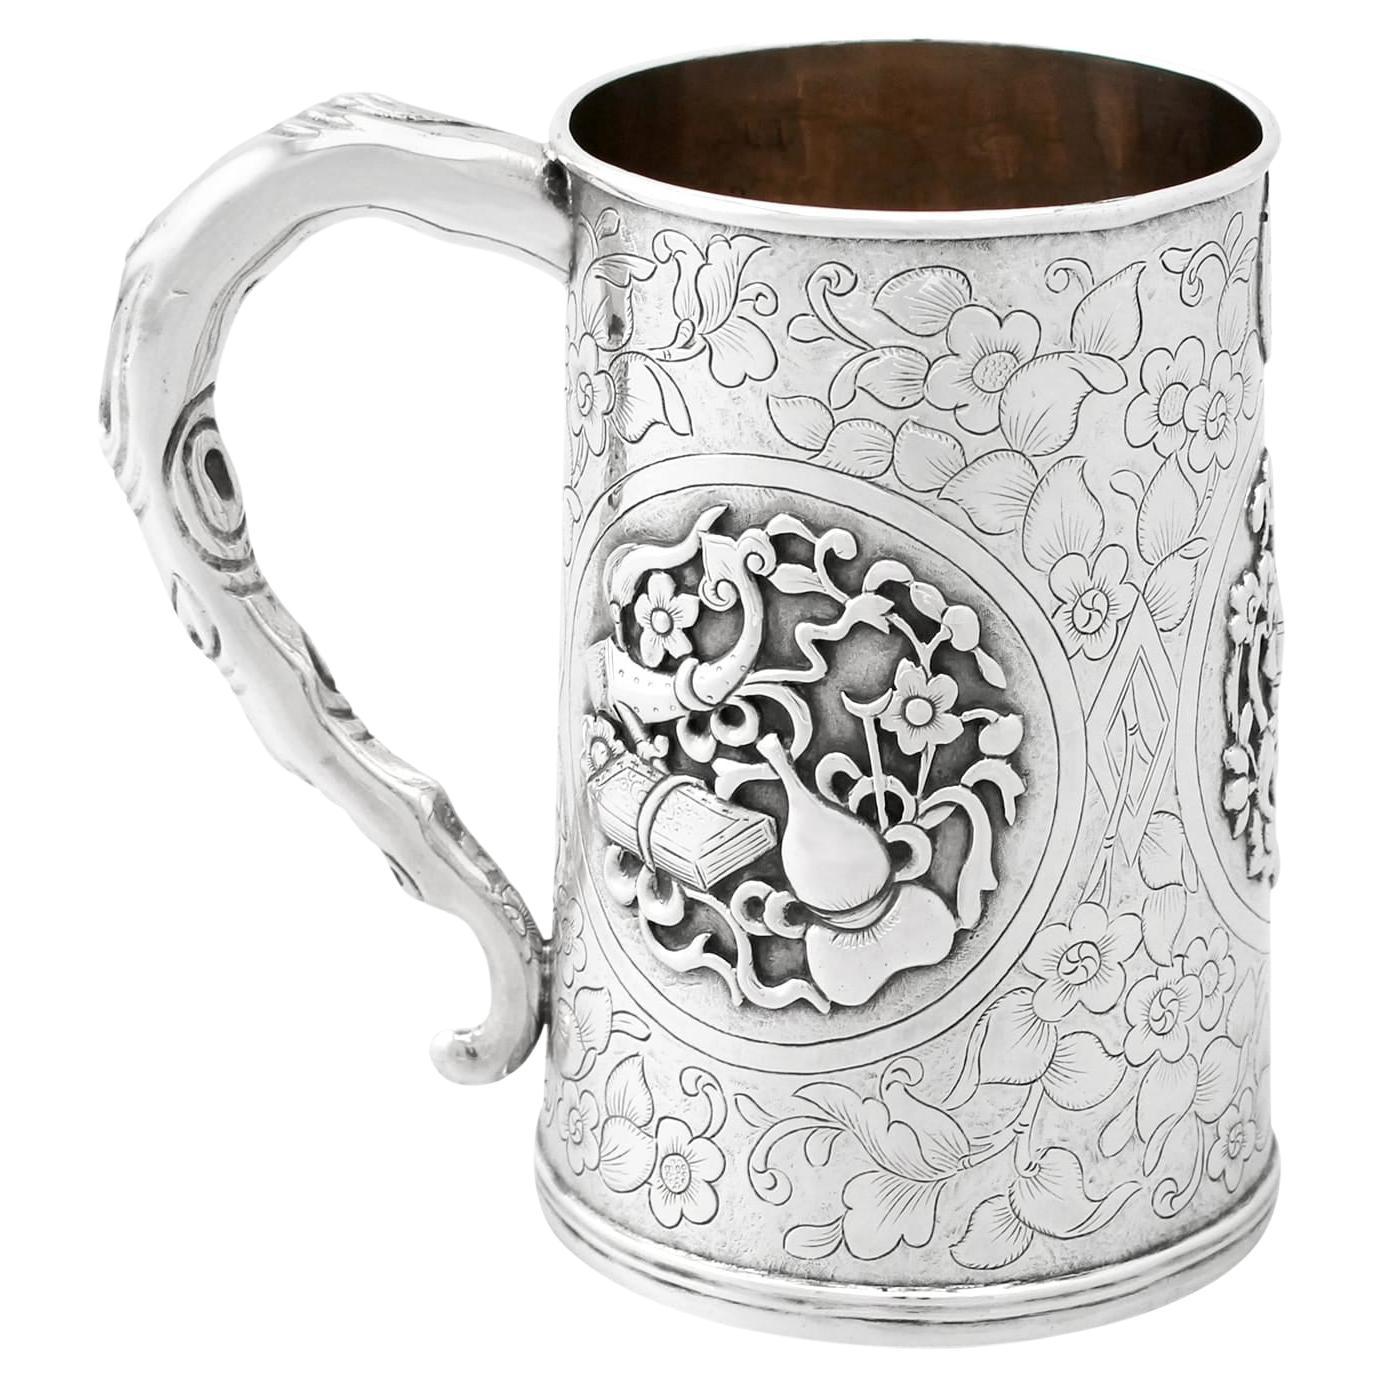 Antique 1850s Chinese Export Silver Mug For Sale